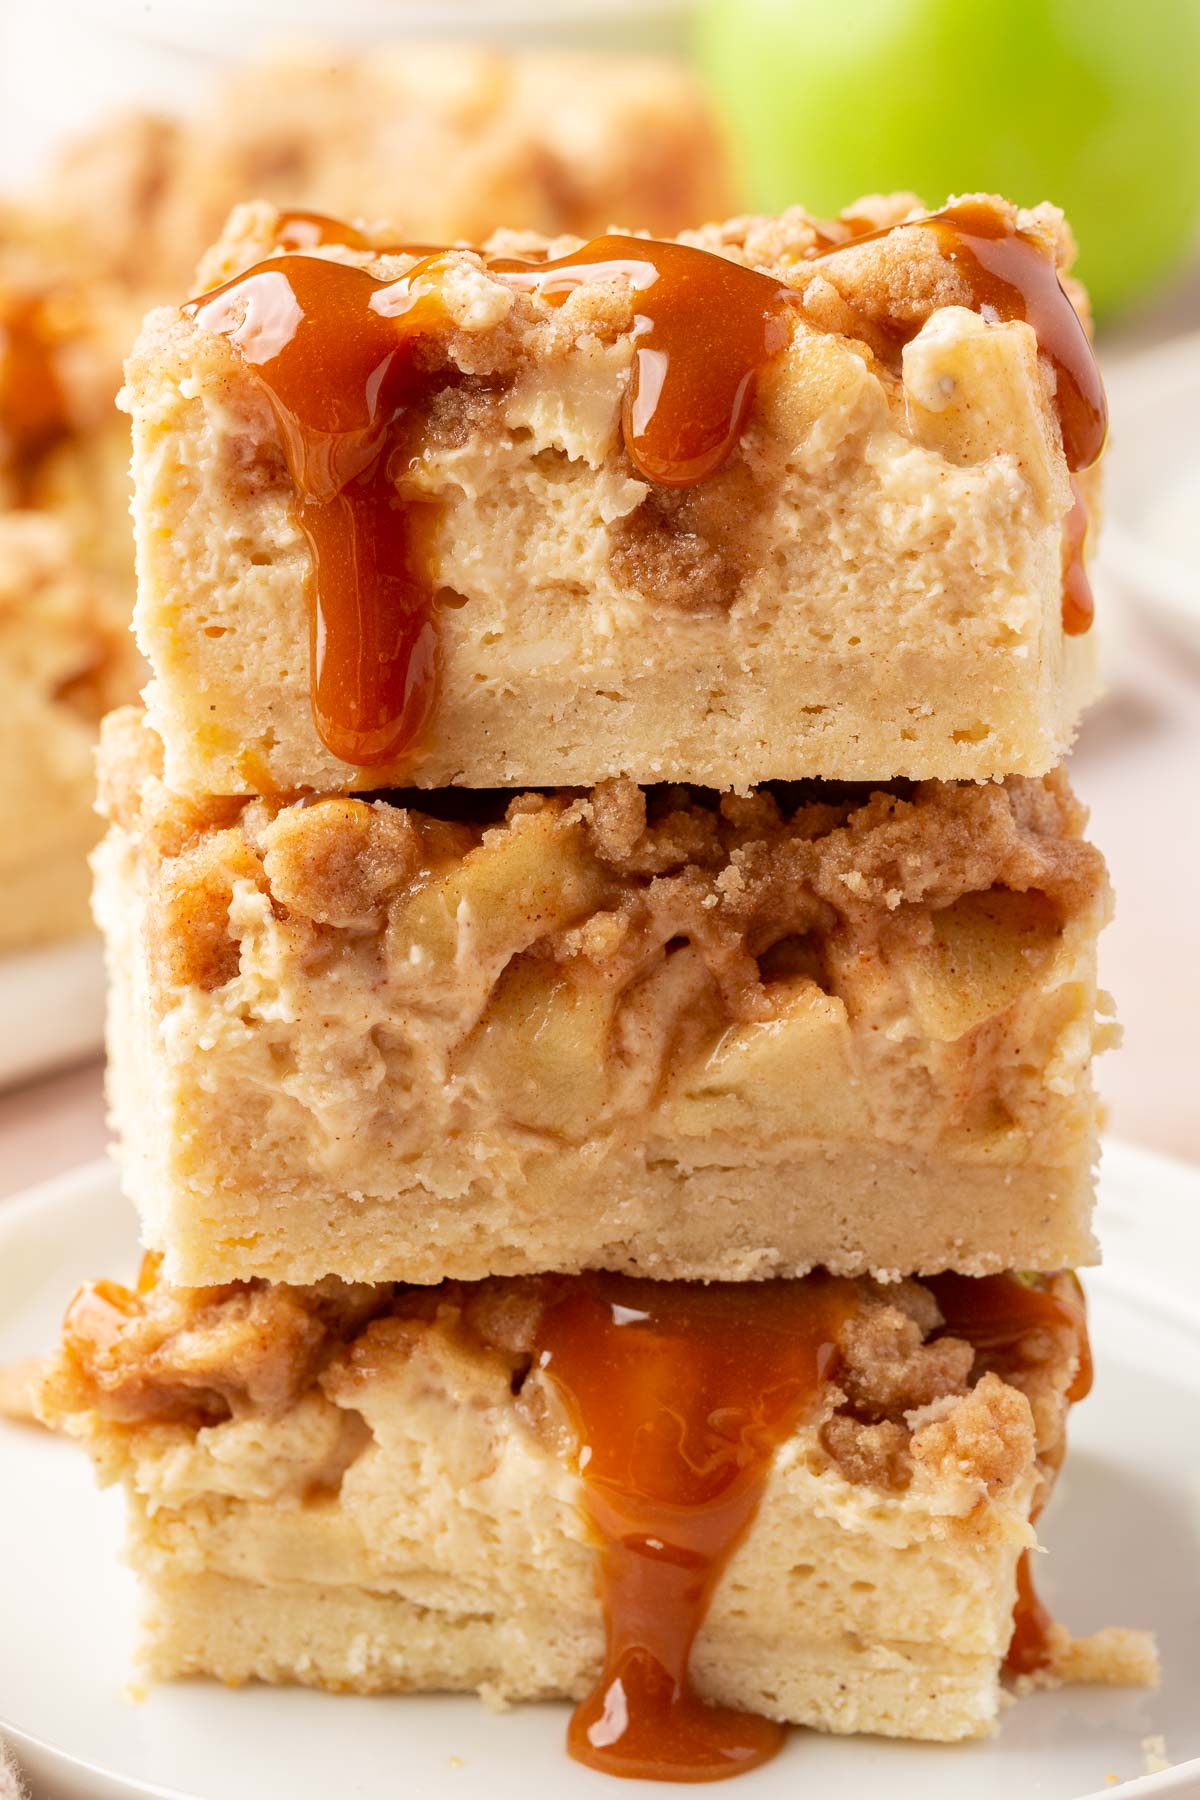 A stack of three gluten free caramel apple cheesecake bars on a dessert plate.